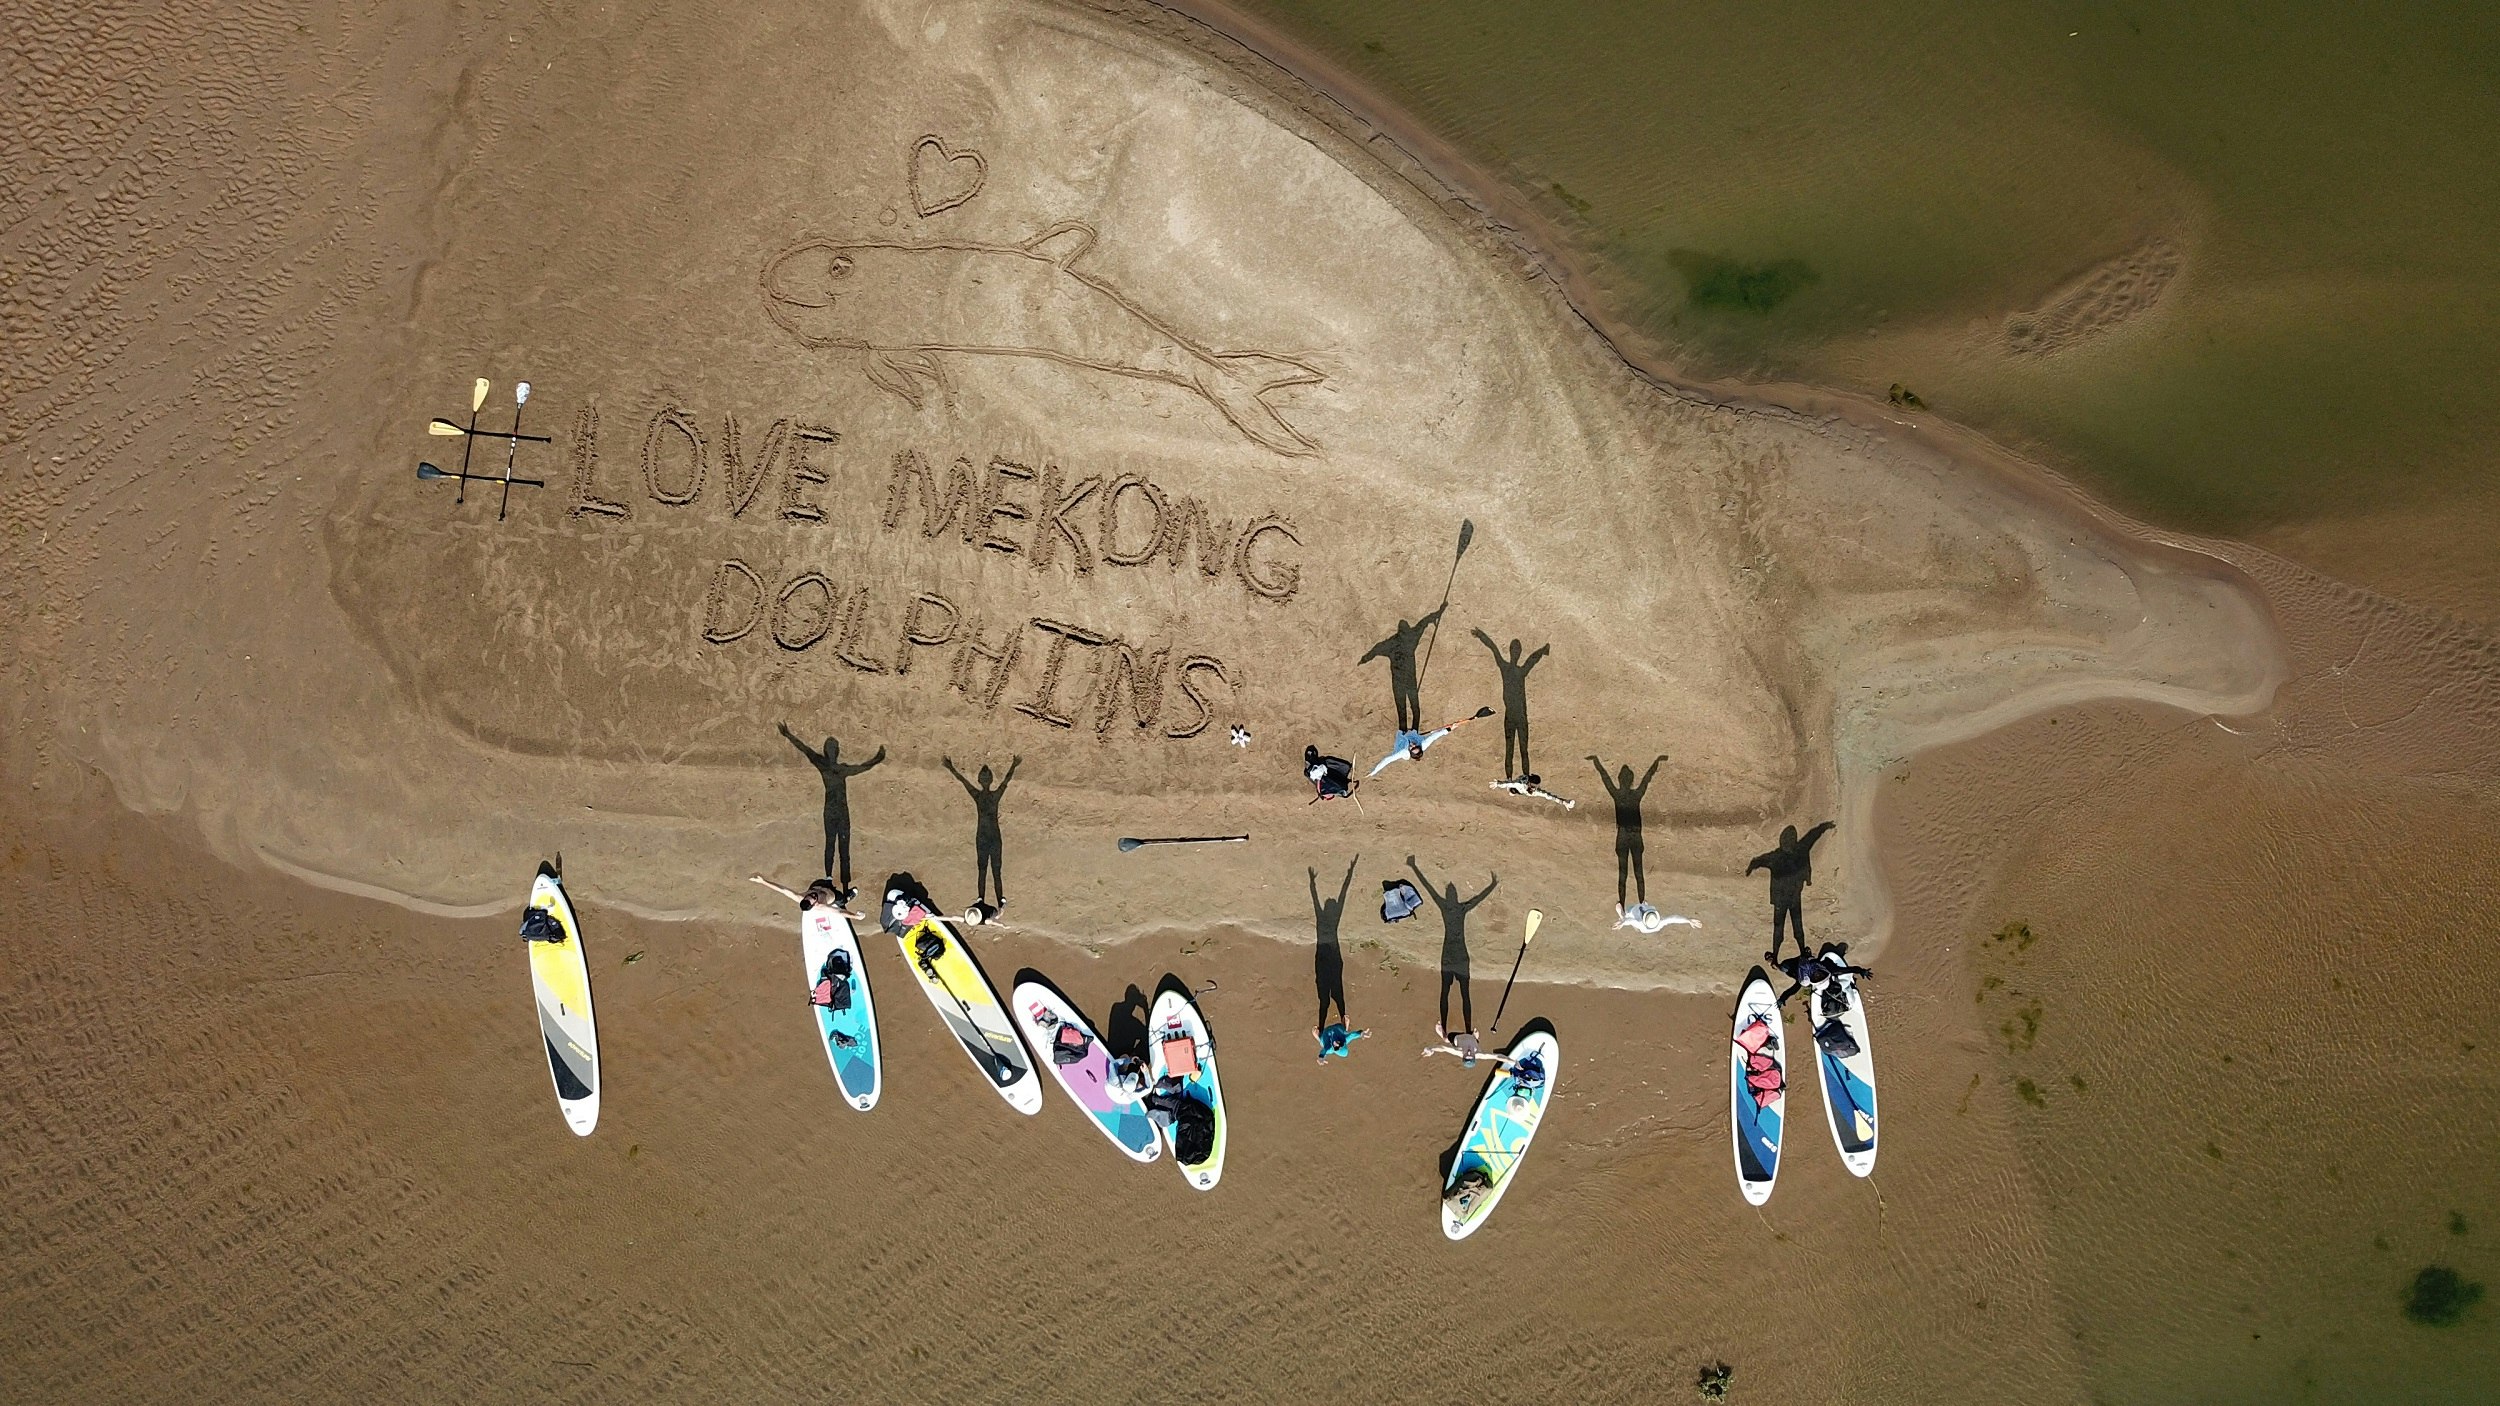 A shot looking down at a sandbar in the Mekong River; eight paddle boards sit on the sand and the shadows of the paddlers - with their arms raised - are cast across the scene. In the sand is written "# love mekong dolphins"